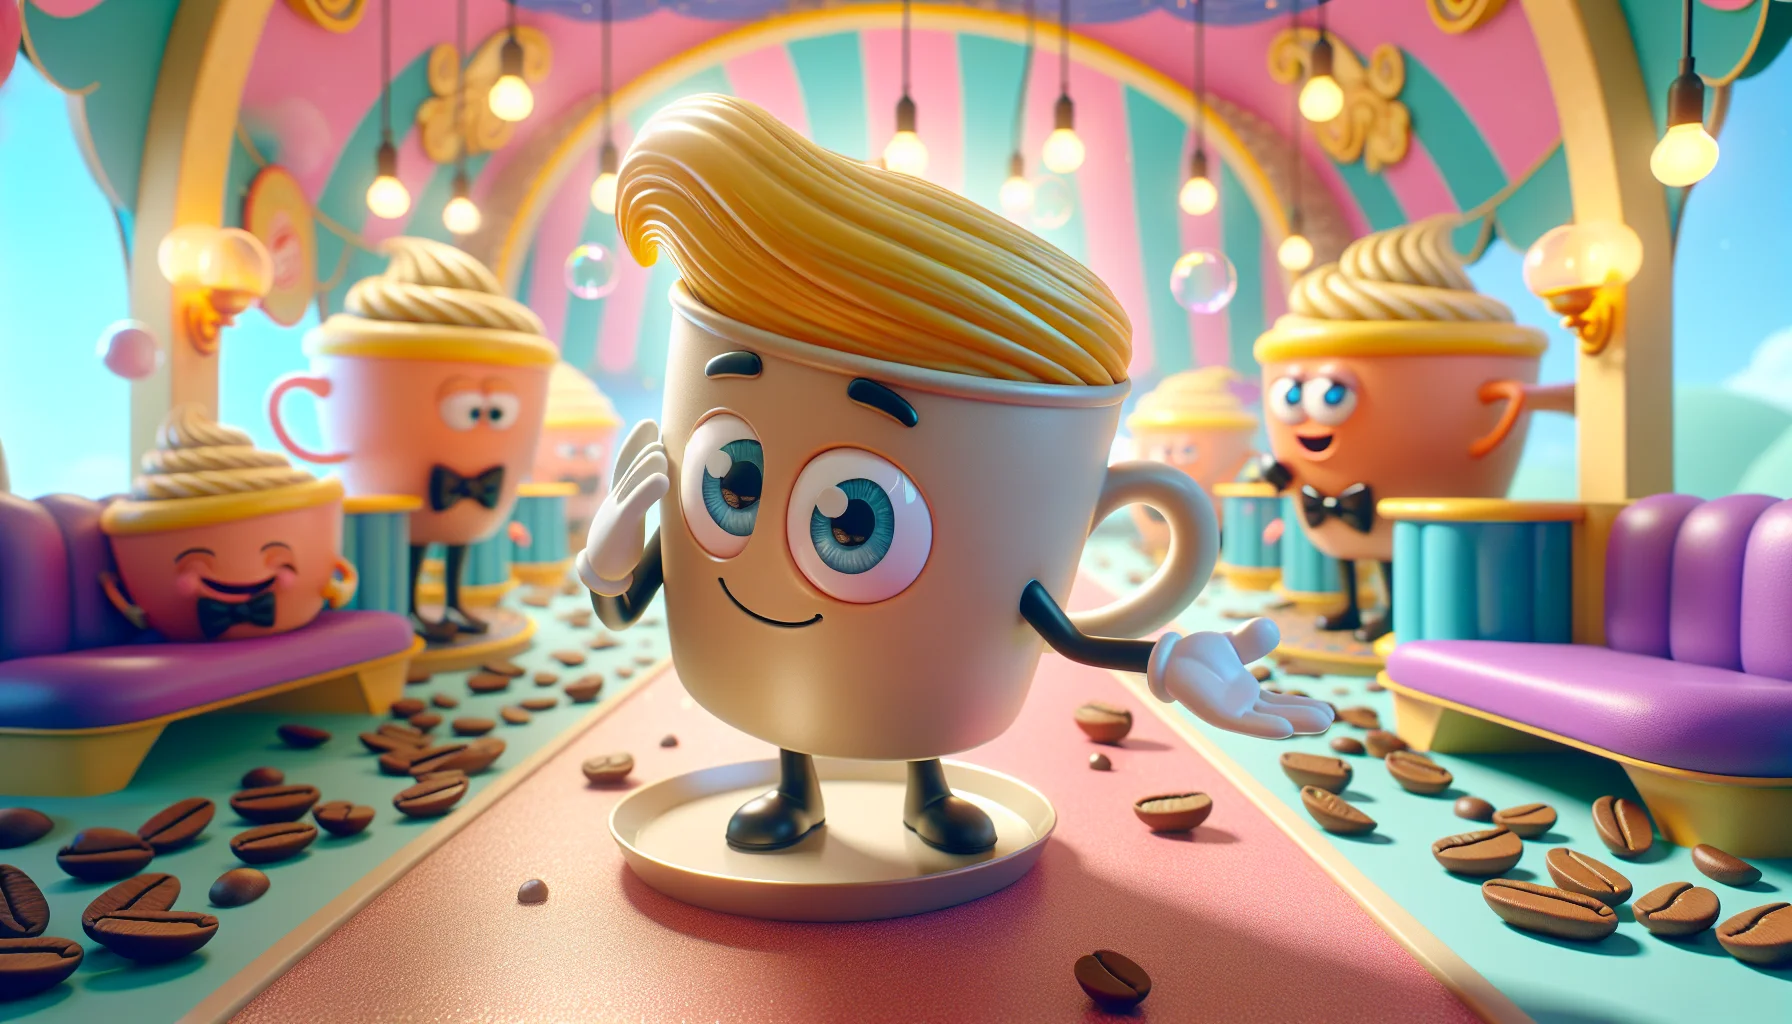 Create a highly detailed and realistic image of an anthropomorphized cup of blonde espresso. It is showcasing a hilarious twist as it acts out an inviting gesture, similar to a waiter bowing, to encourage people to enjoy its contents. In the background, there is a colorful, whimsically stylized coffee shop setting with other anthropomorphized coffee cups of different shades engaged in similar amusing activities. The environment has soft lighting and it's filled with floating coffee beans and bubbles creating a cheerful and light-hearted ambiance.